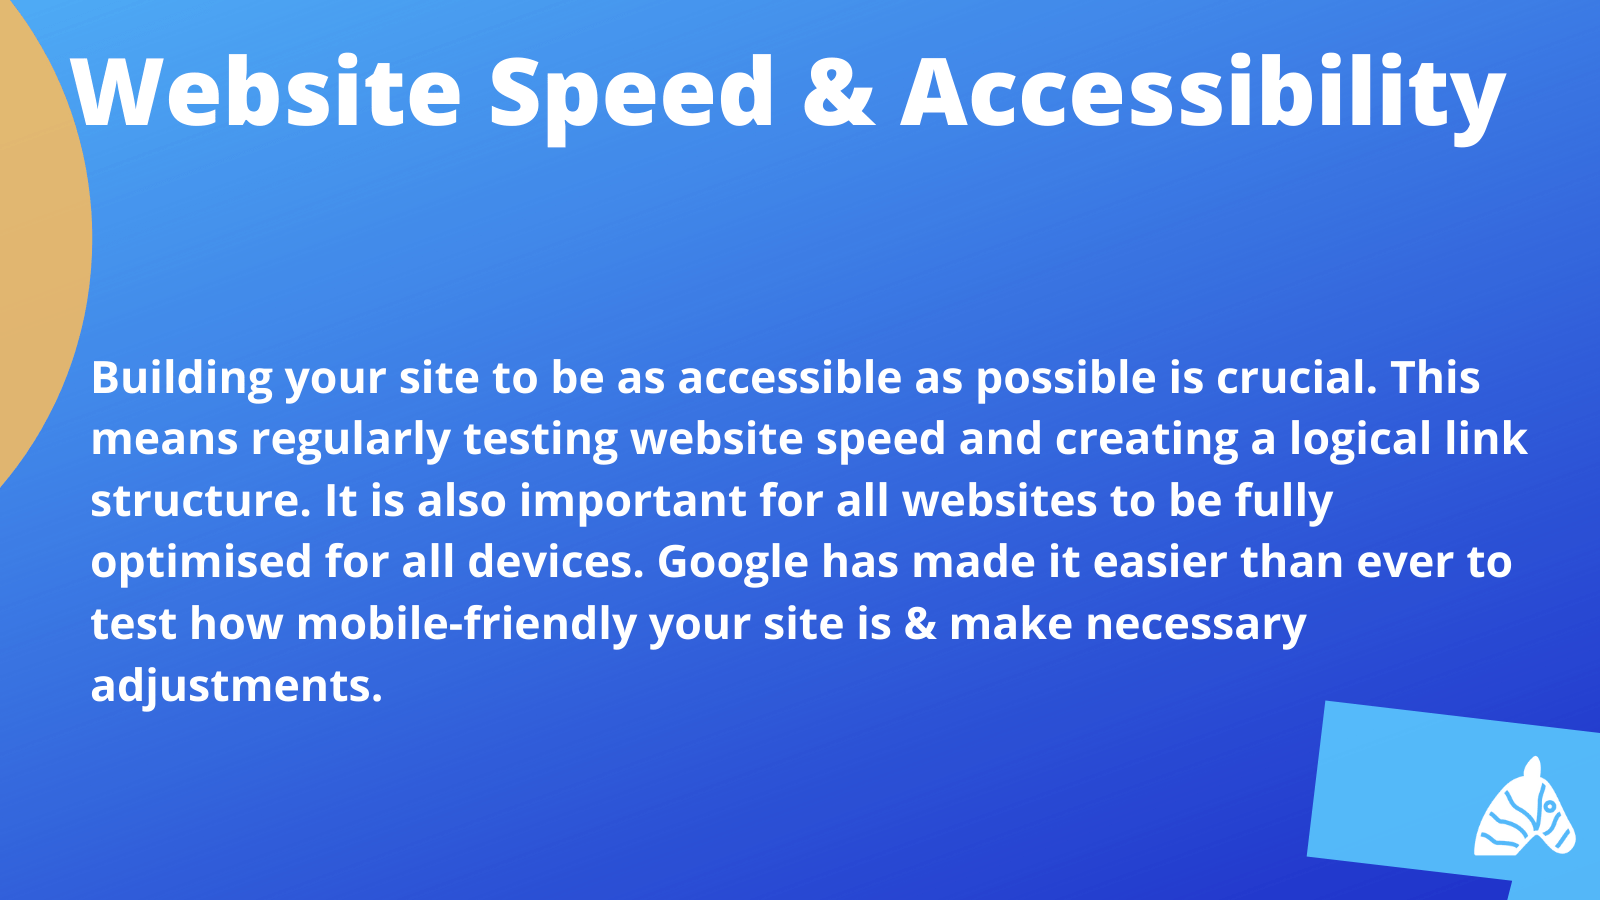 website speed and accessibility tips from Google's search for beginners video